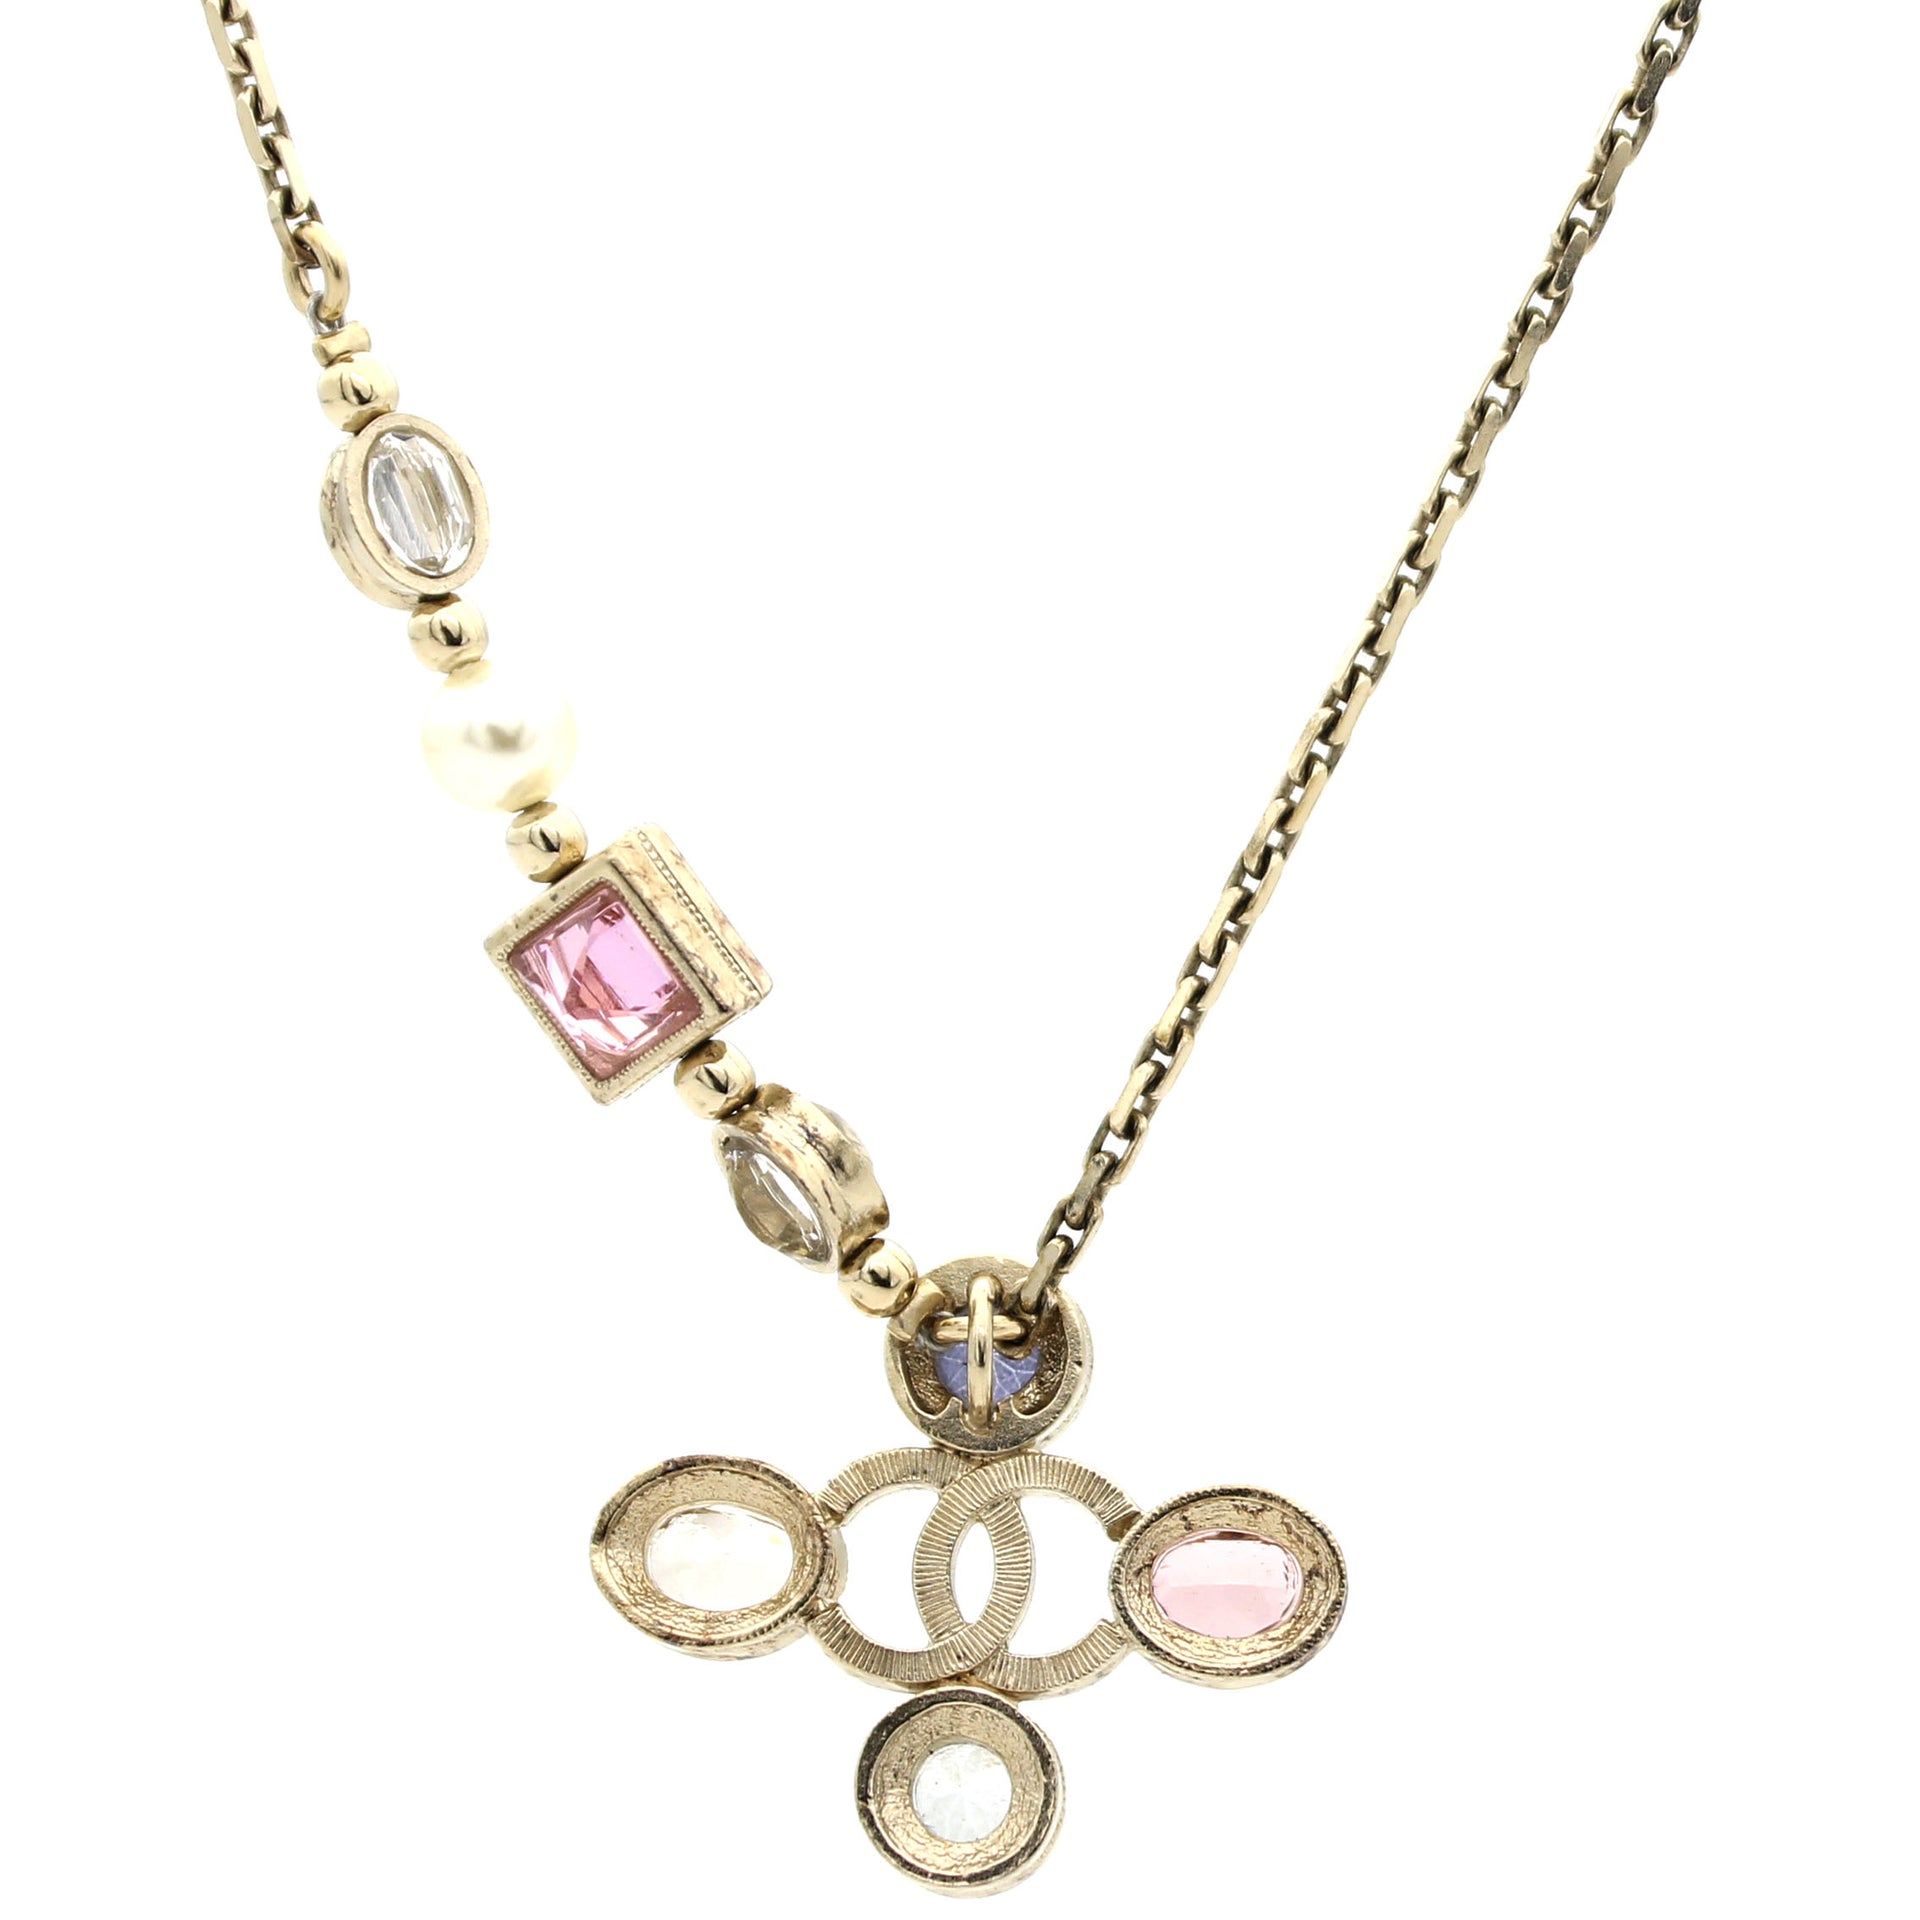 Mix Crystals Cross Pendant Necklace Gold